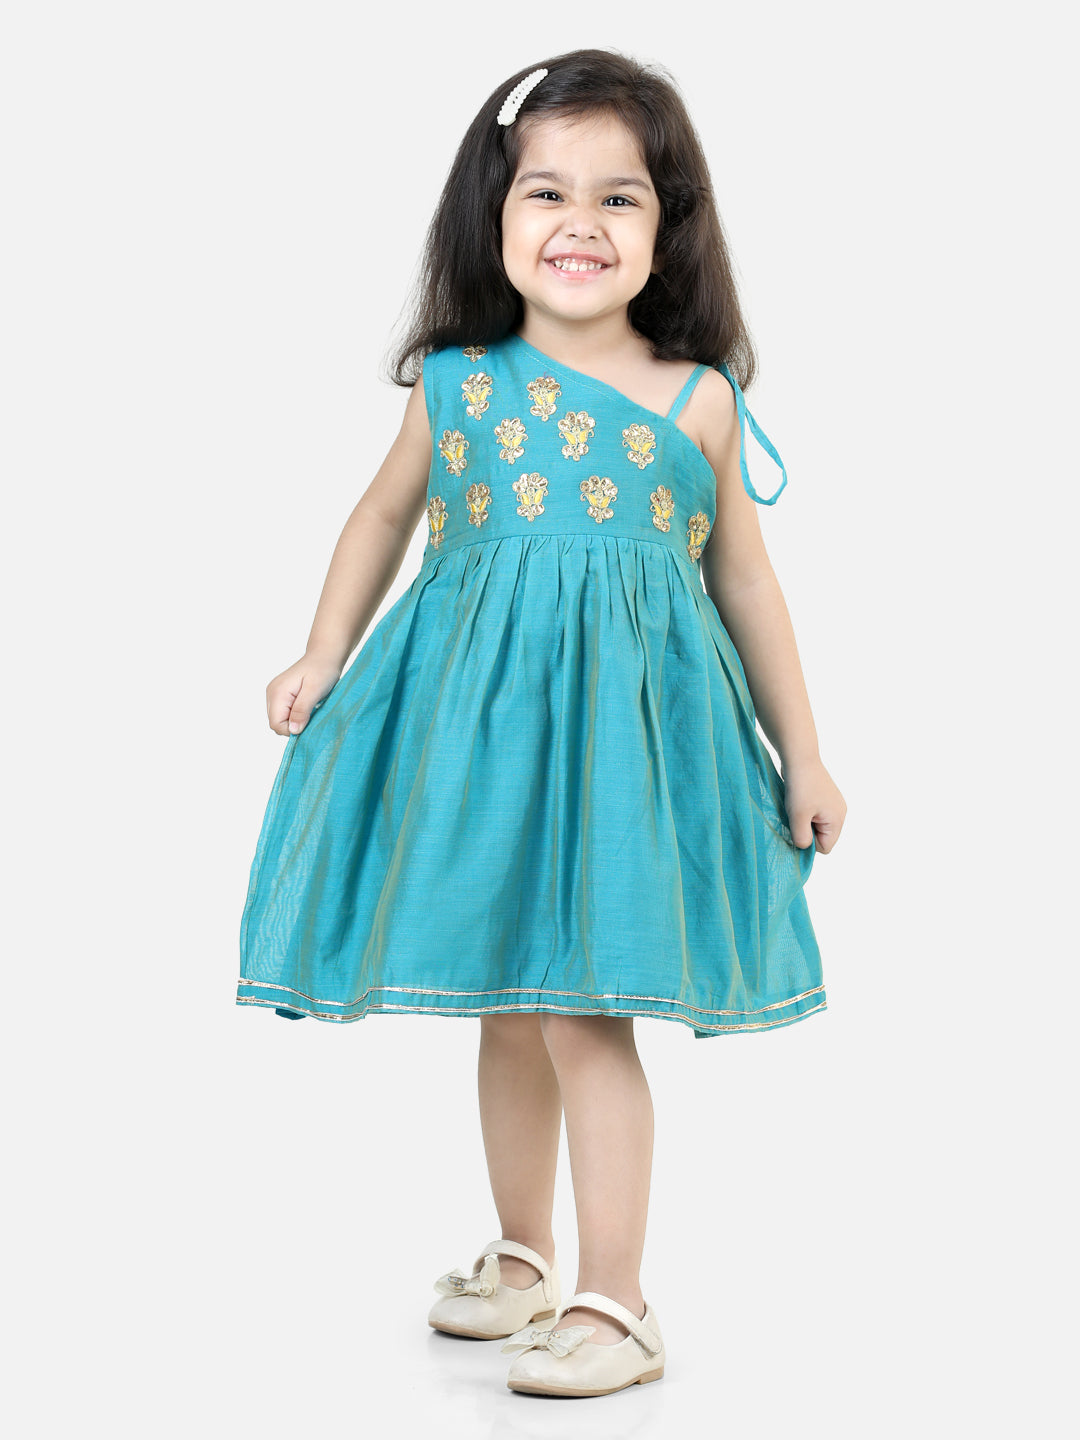 BownBee Gota Patti Embroidery Chanderi Frock Party Dress for Girls- Teal